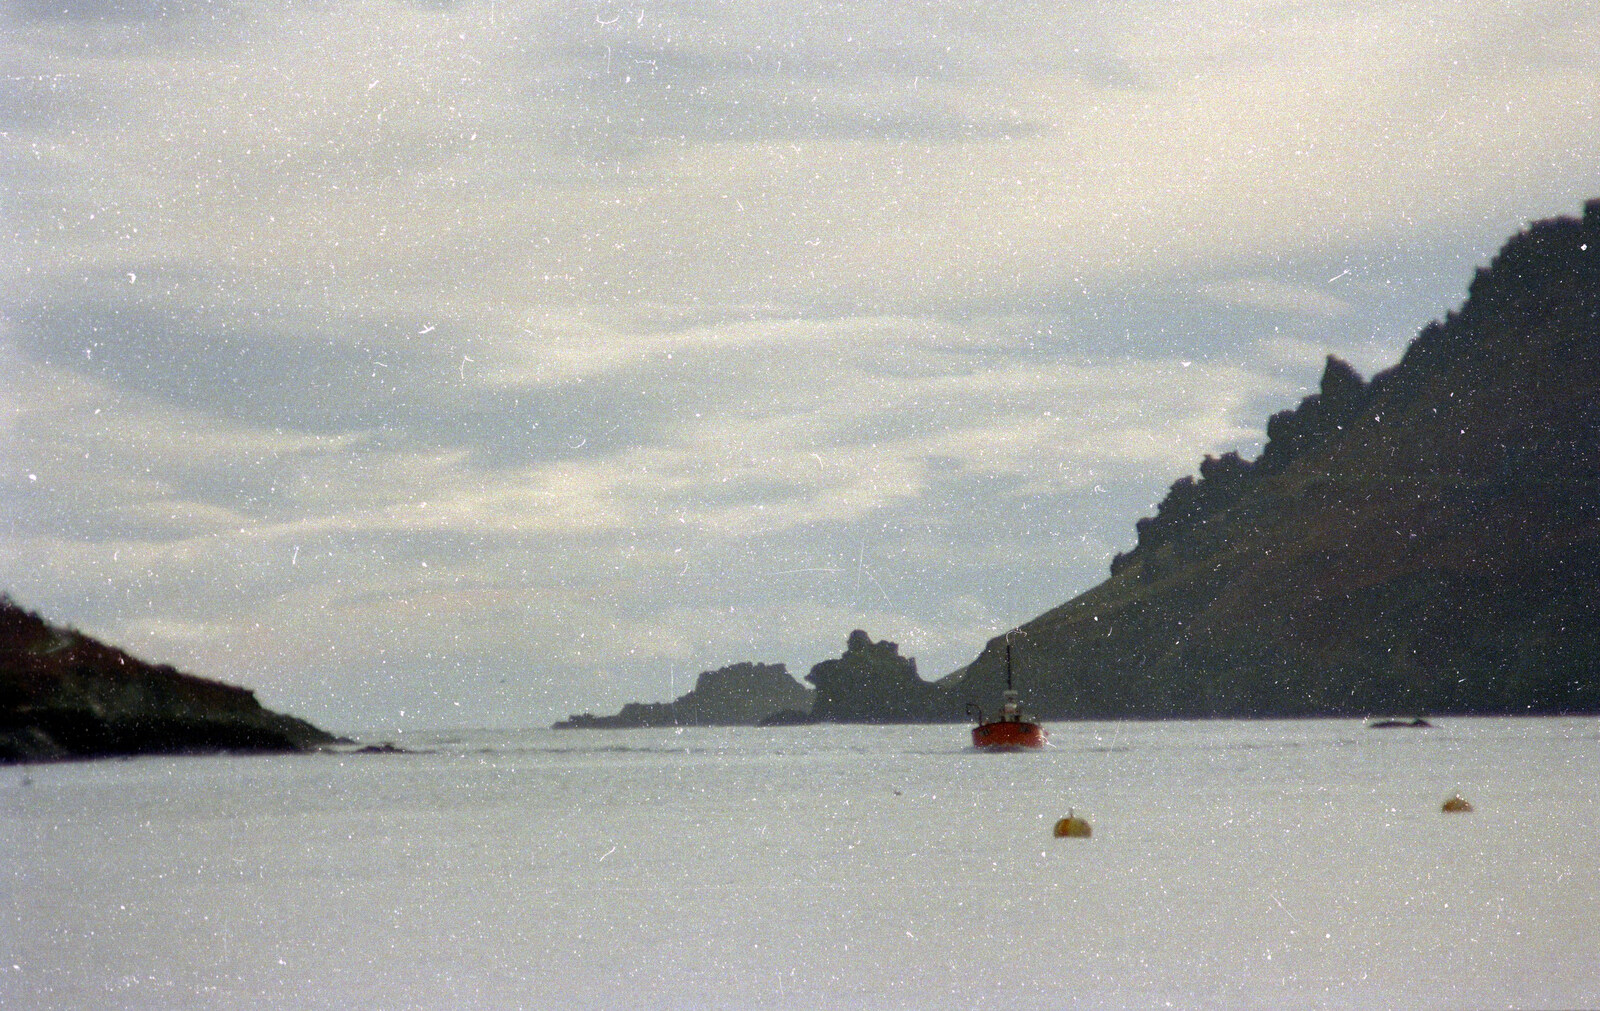 A fishing boat trundles up the river at Salcombe from Uni: The Plymouth Polytechnic Satique Project, Salcombe and Plymouth - 10th May 1986